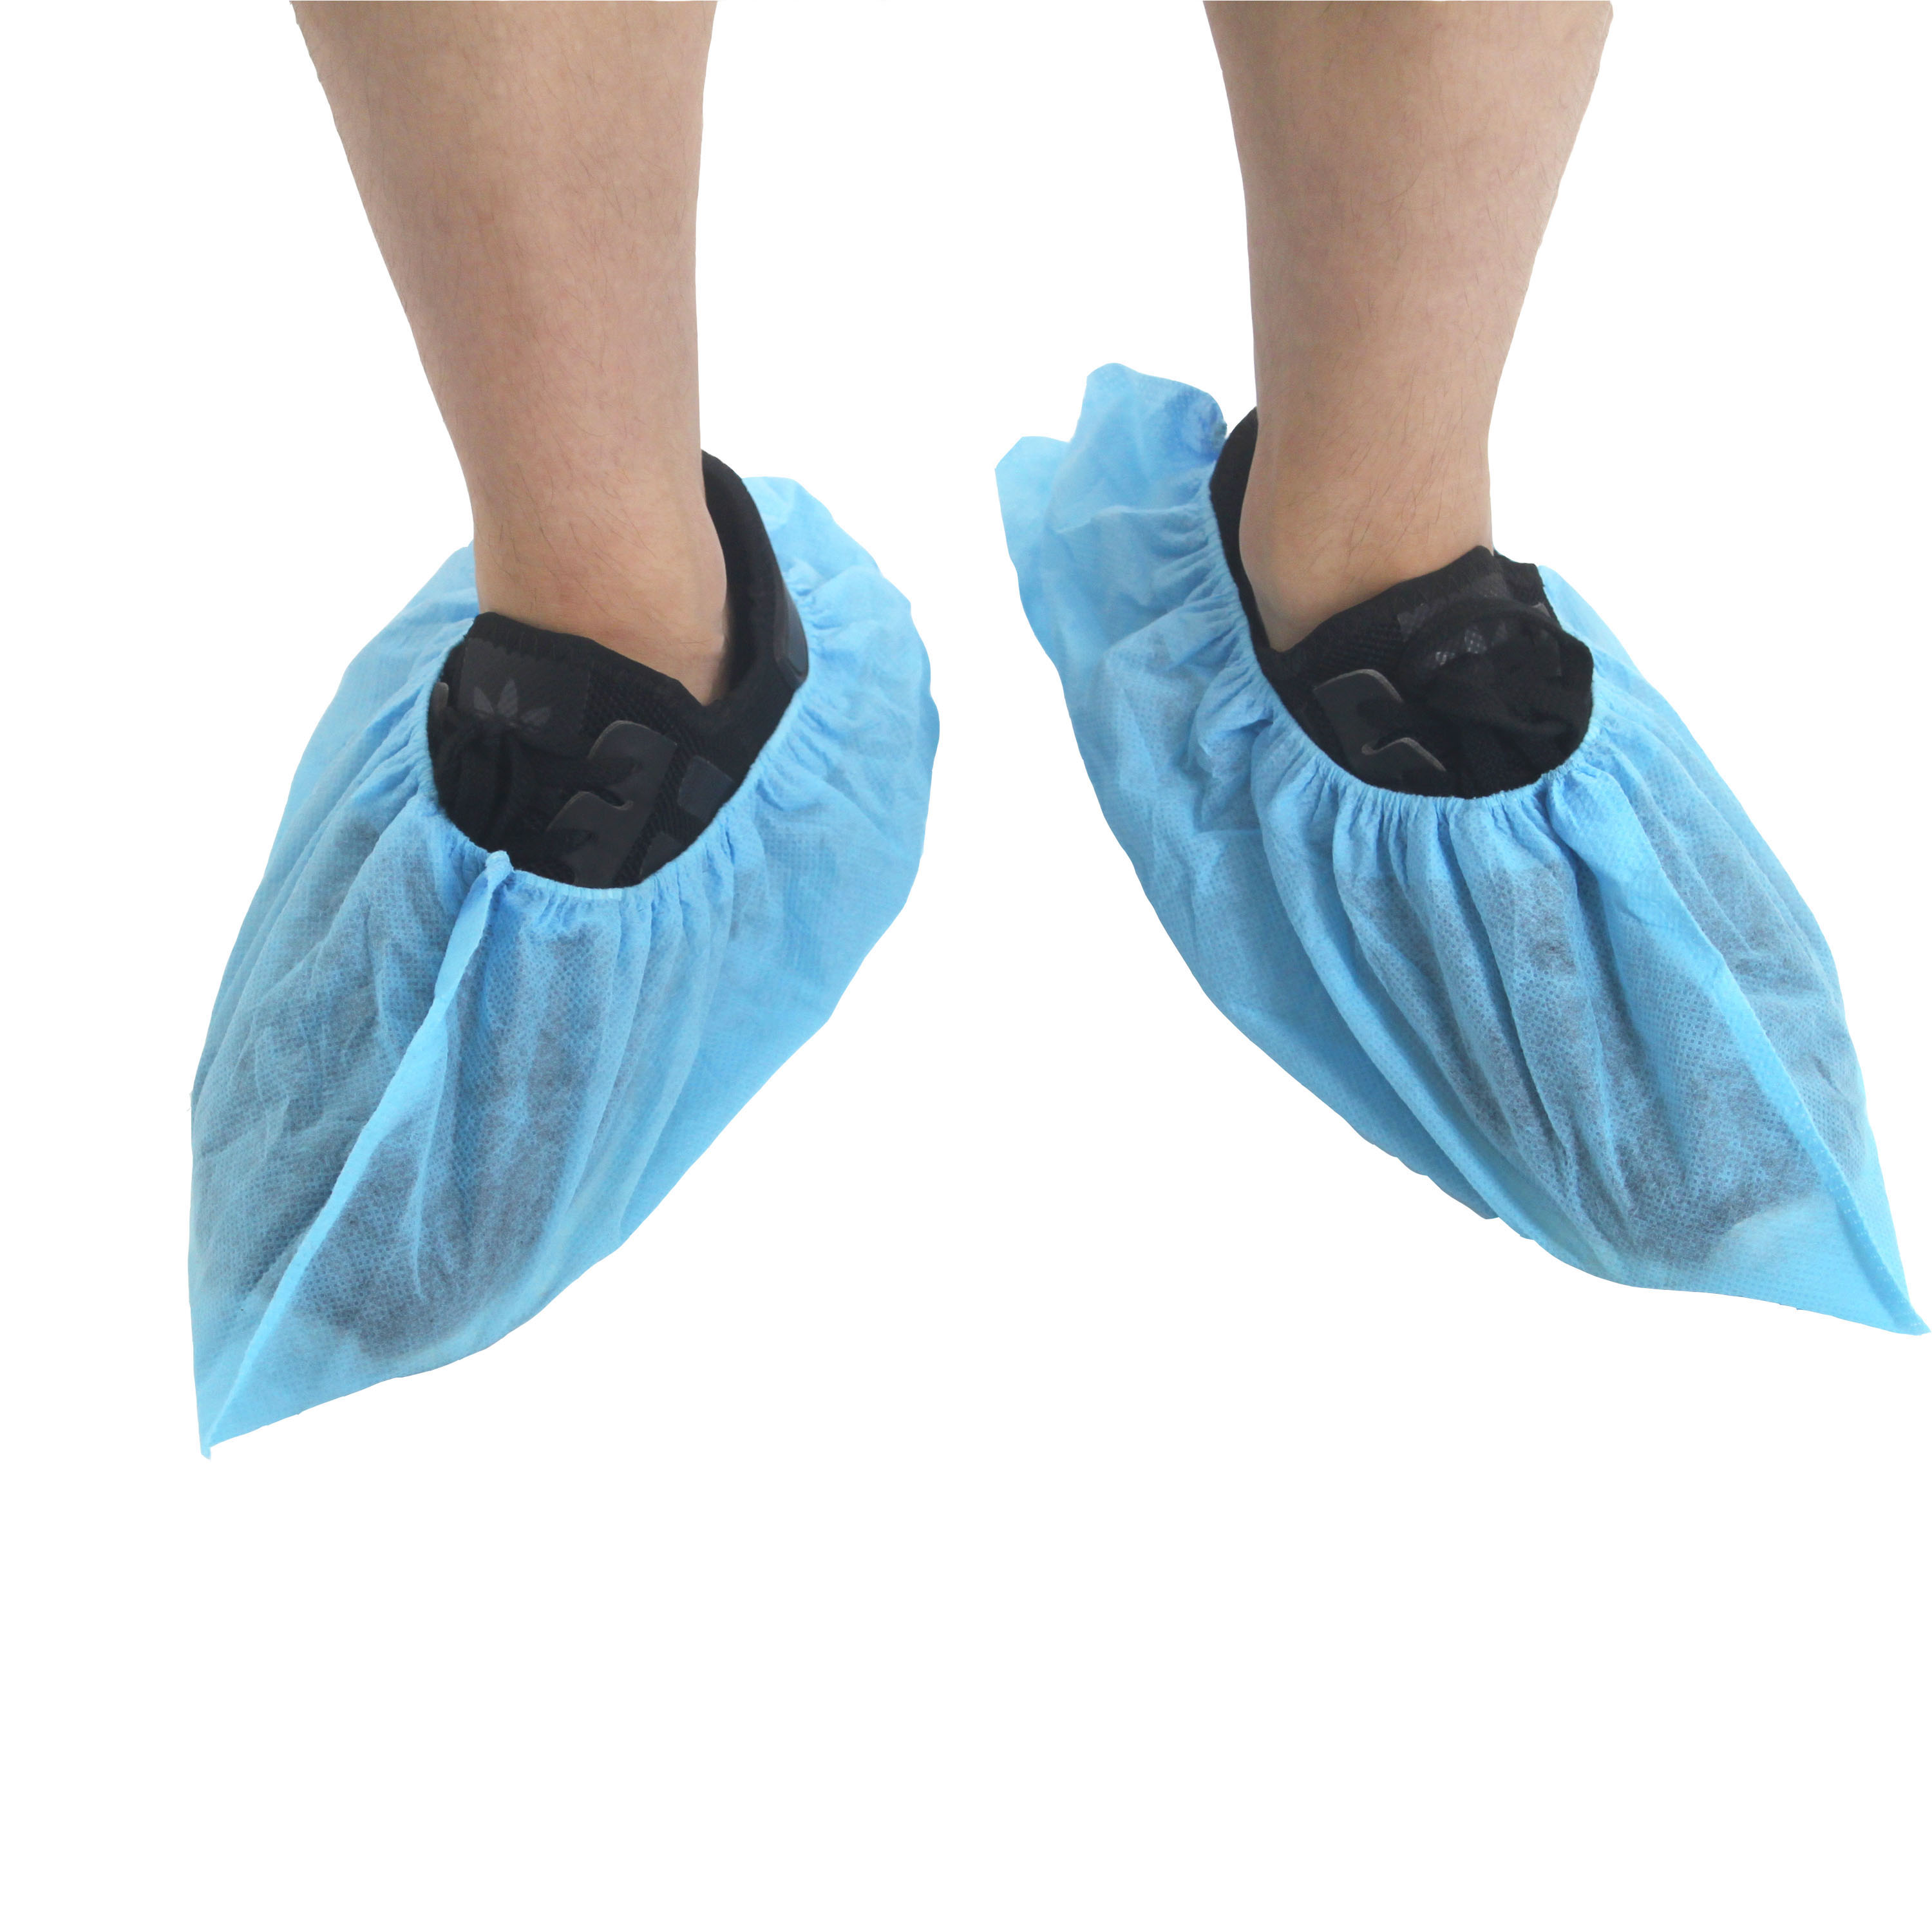 Disposable nonwoven shoe cover - Buy Product on Xiantao Topmed Nonwoven ...